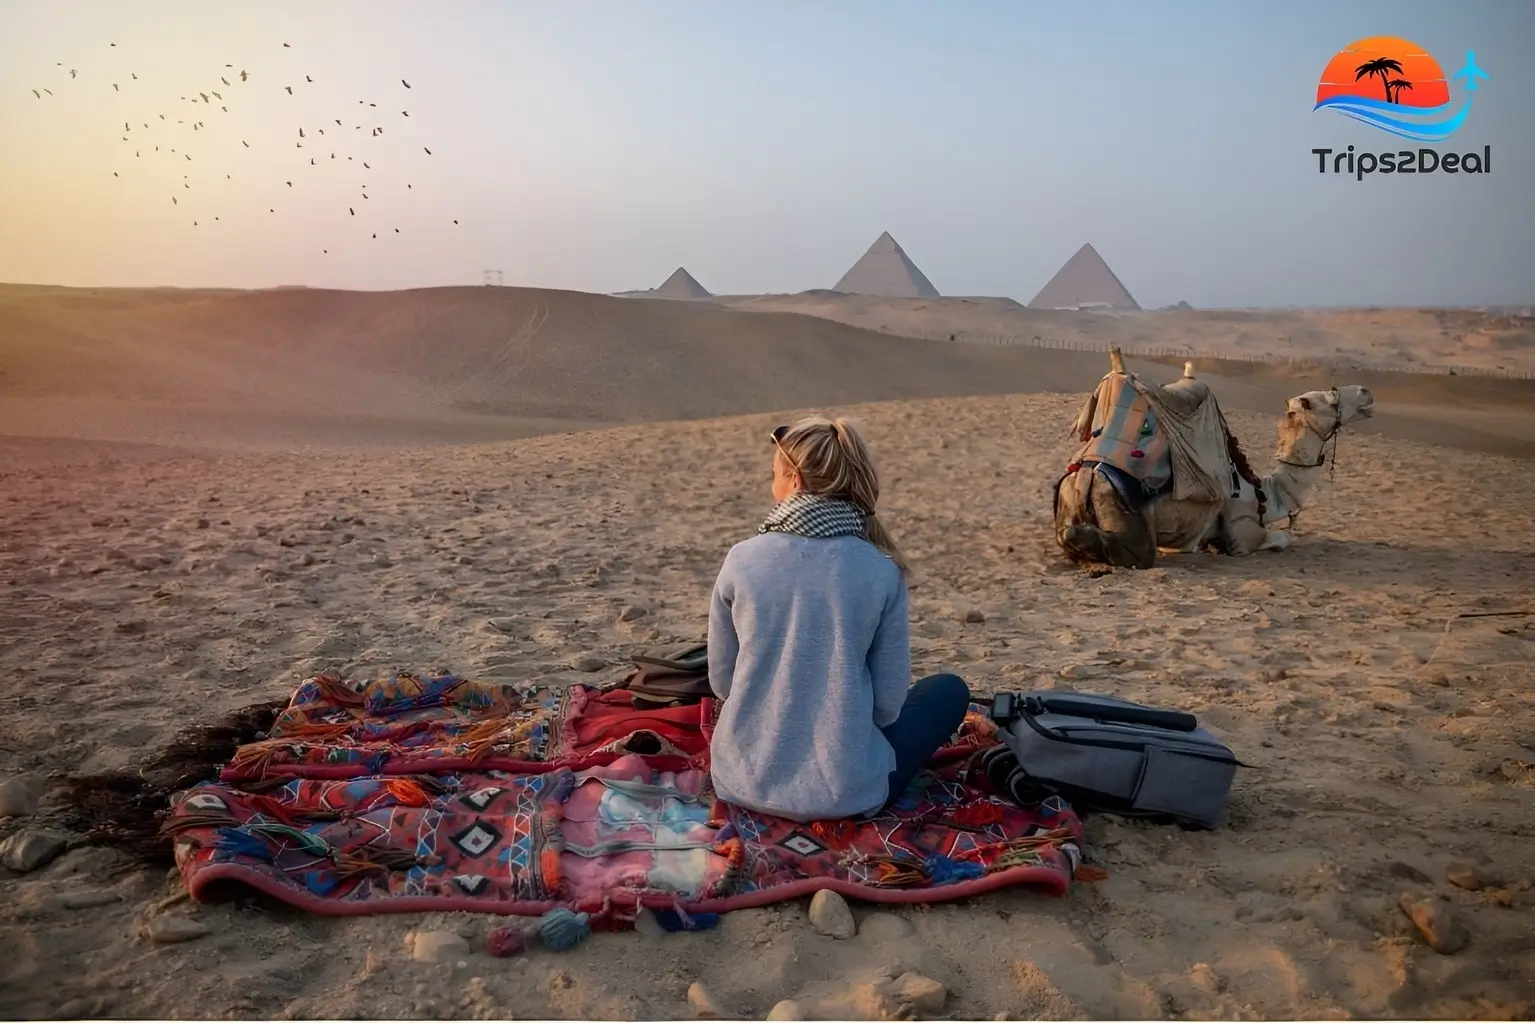 A Day Trip of Cairo and the Pyramids by Bus from Sharm El-Sheikh